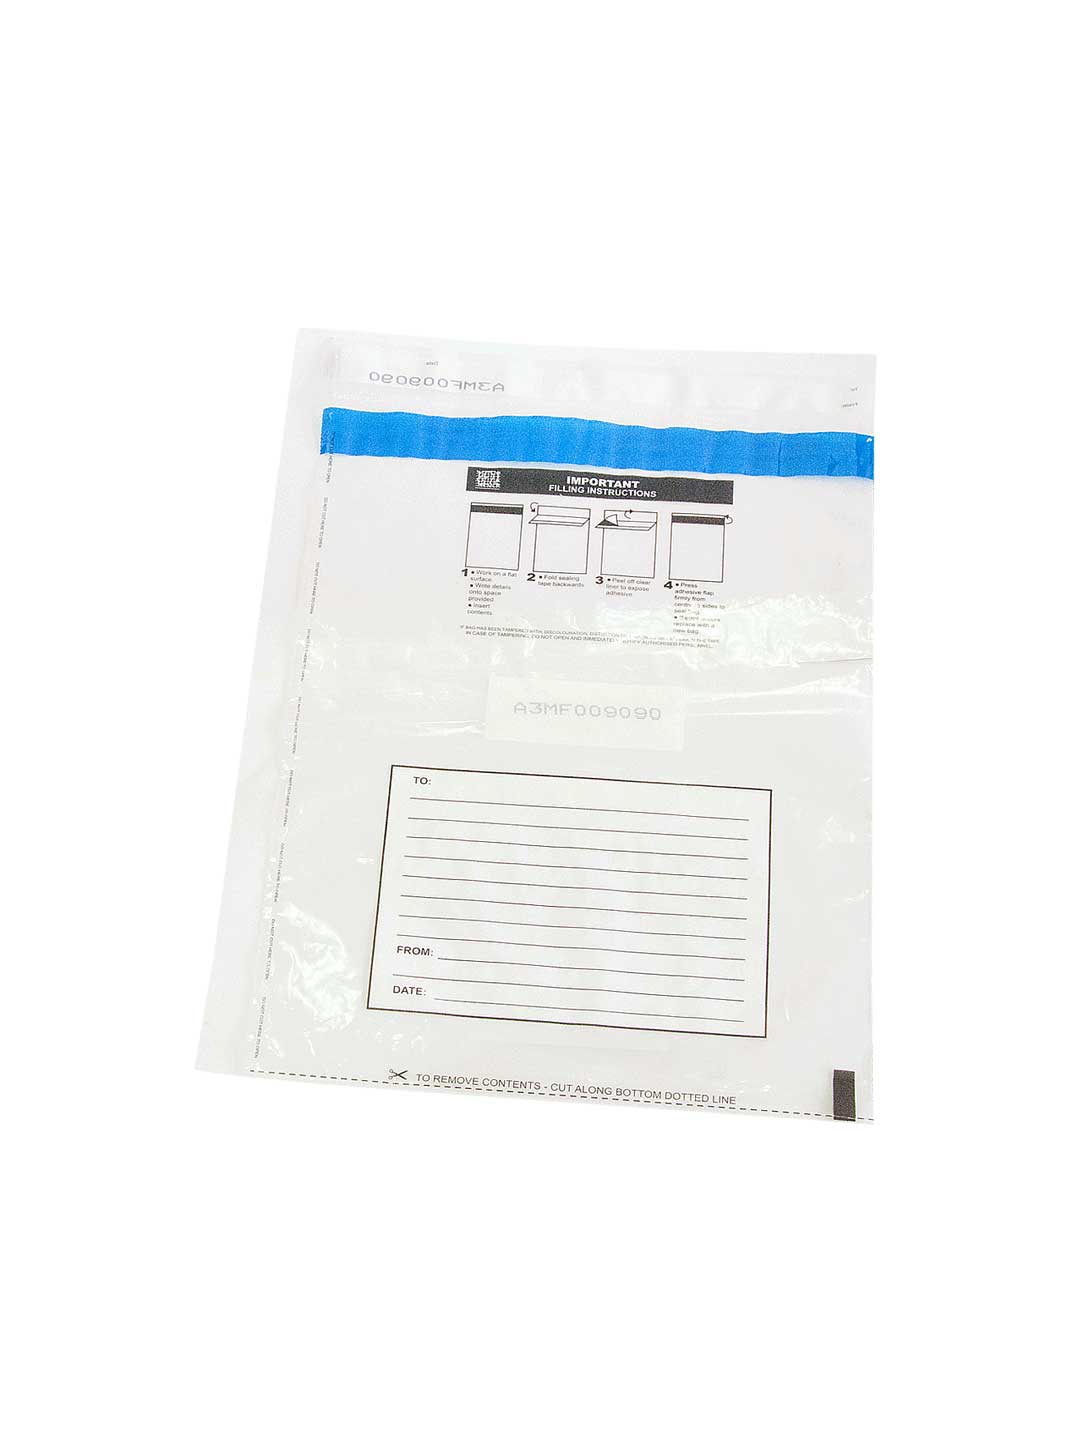 Security Plastic Tamper Proof Document Seal Bags Clear Large Envelope Barcode 